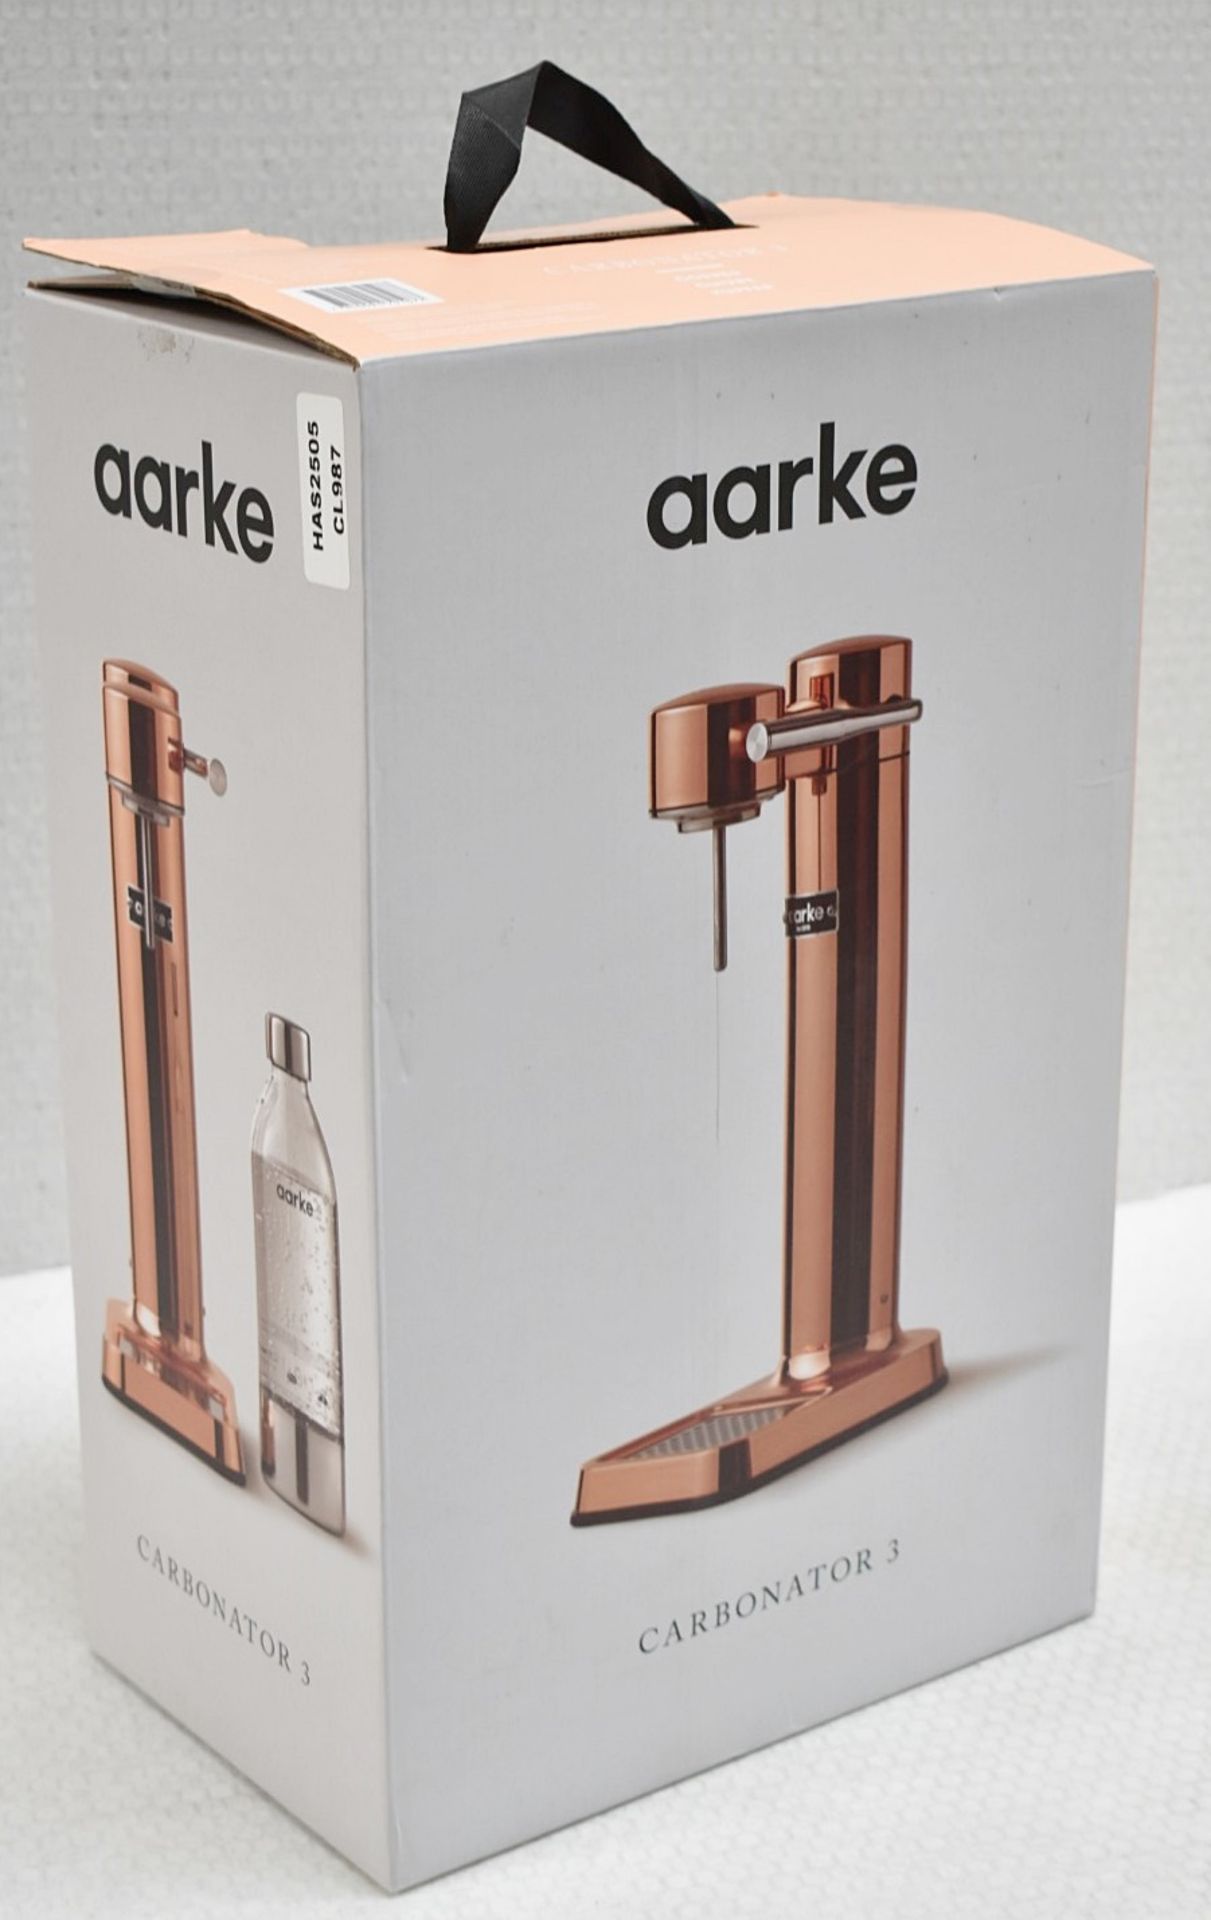 1 x AARKE Carbonator 3 With a Copper Finish - Original Price £179.00 - Unused Boxed Stock - Image 4 of 15